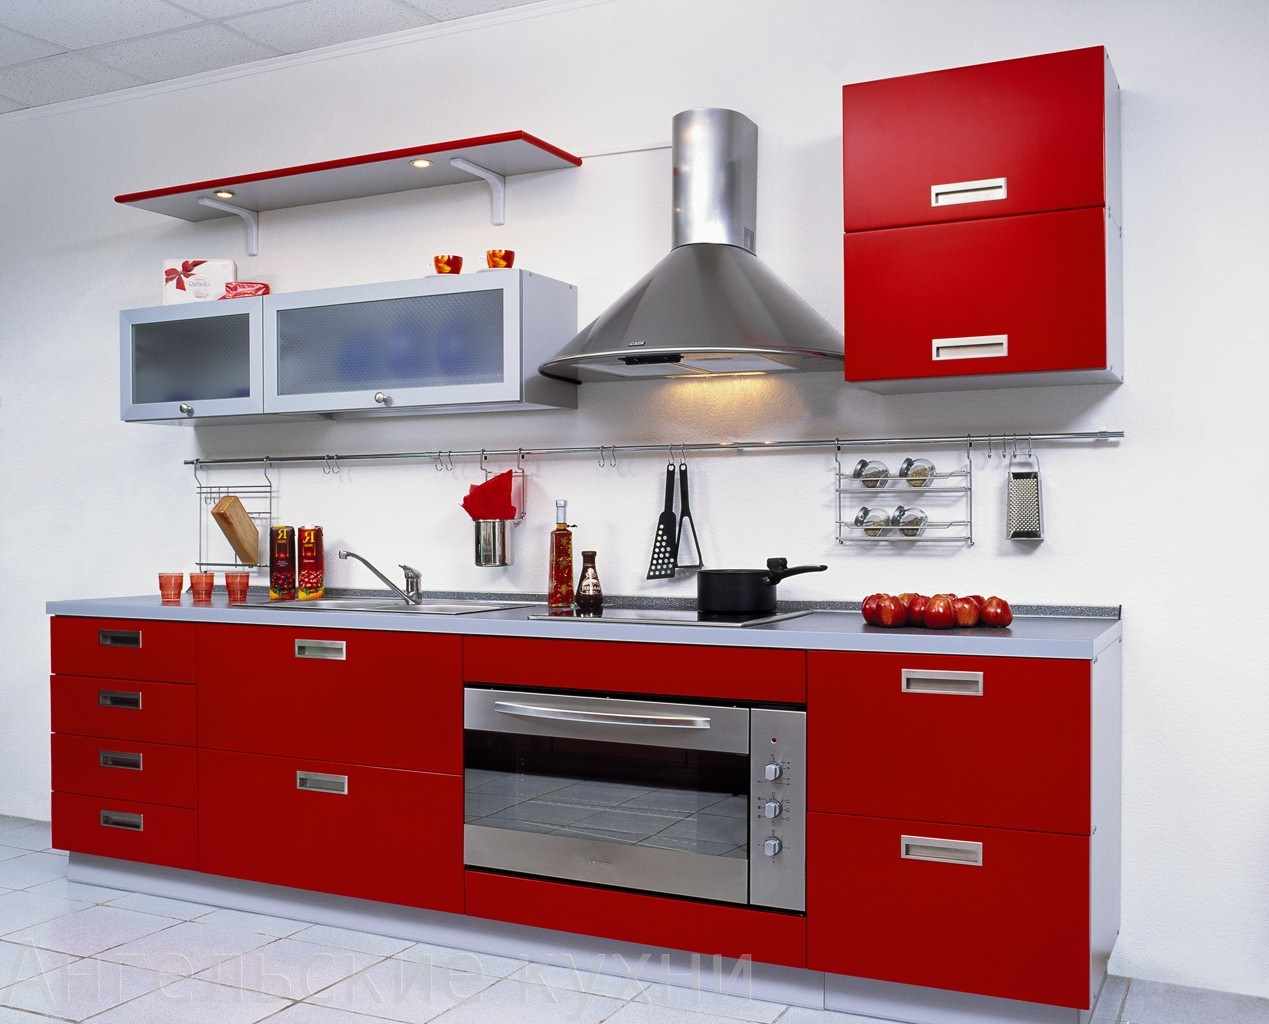 an example of an unusual design of a red kitchen